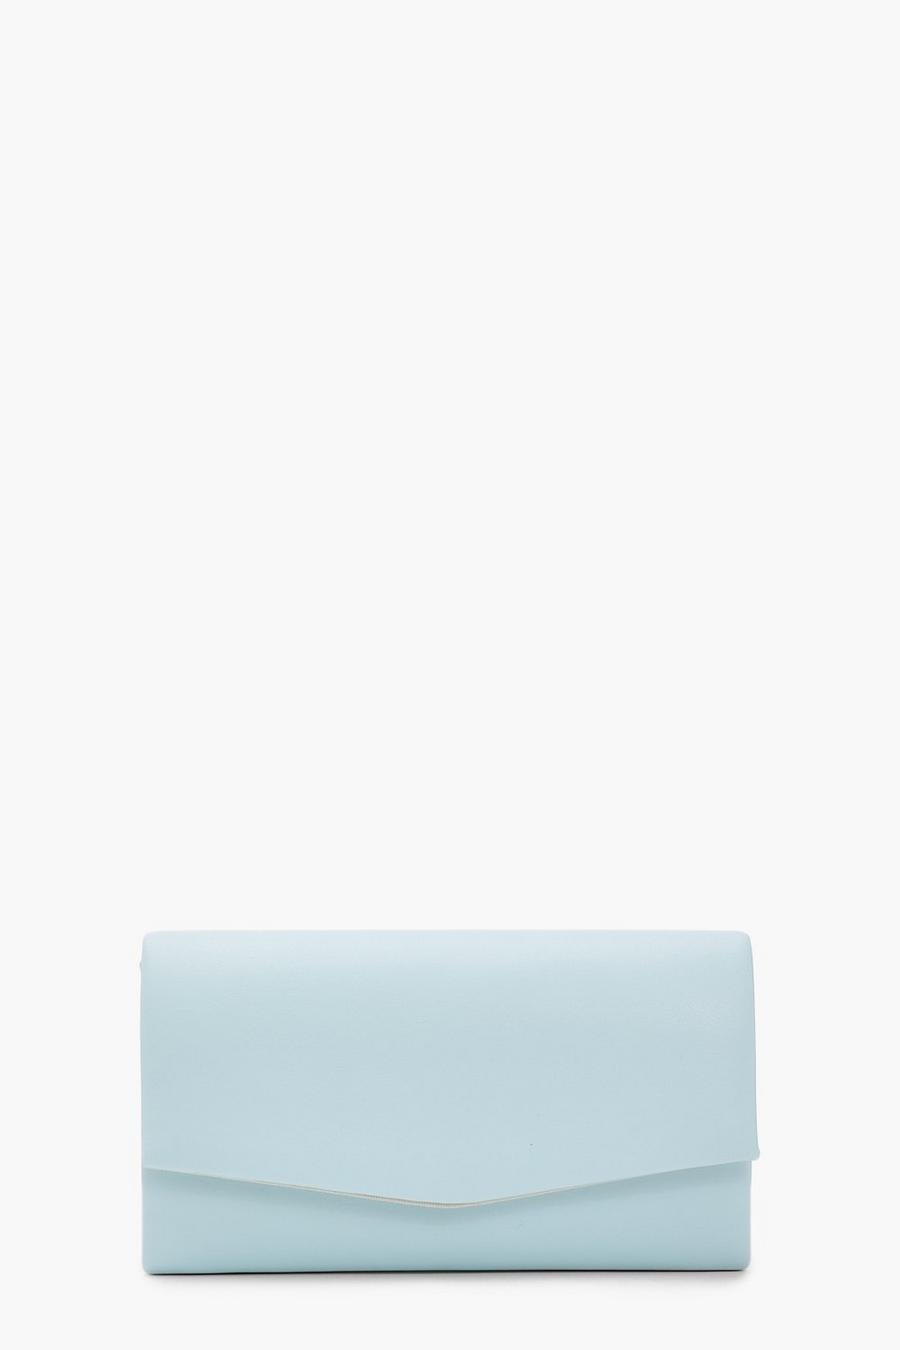 Turquoise blue Basic Structured Clutch